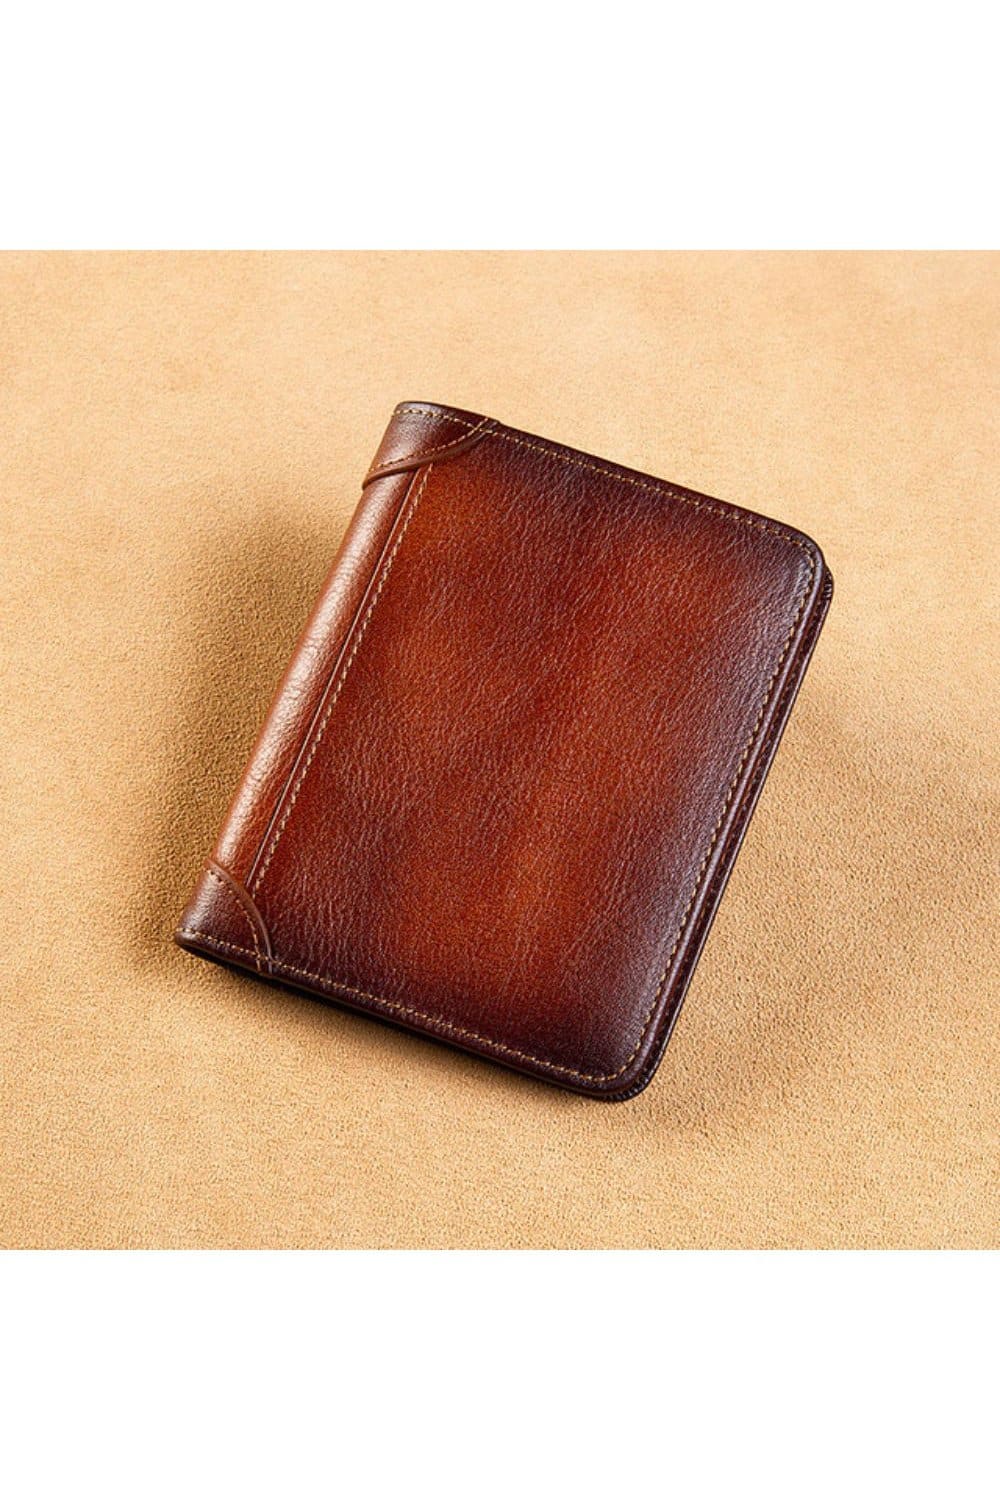 Timeless Leather Wallet for Men - A Must-Have Accessory, Dark Blue Fatio General Trading